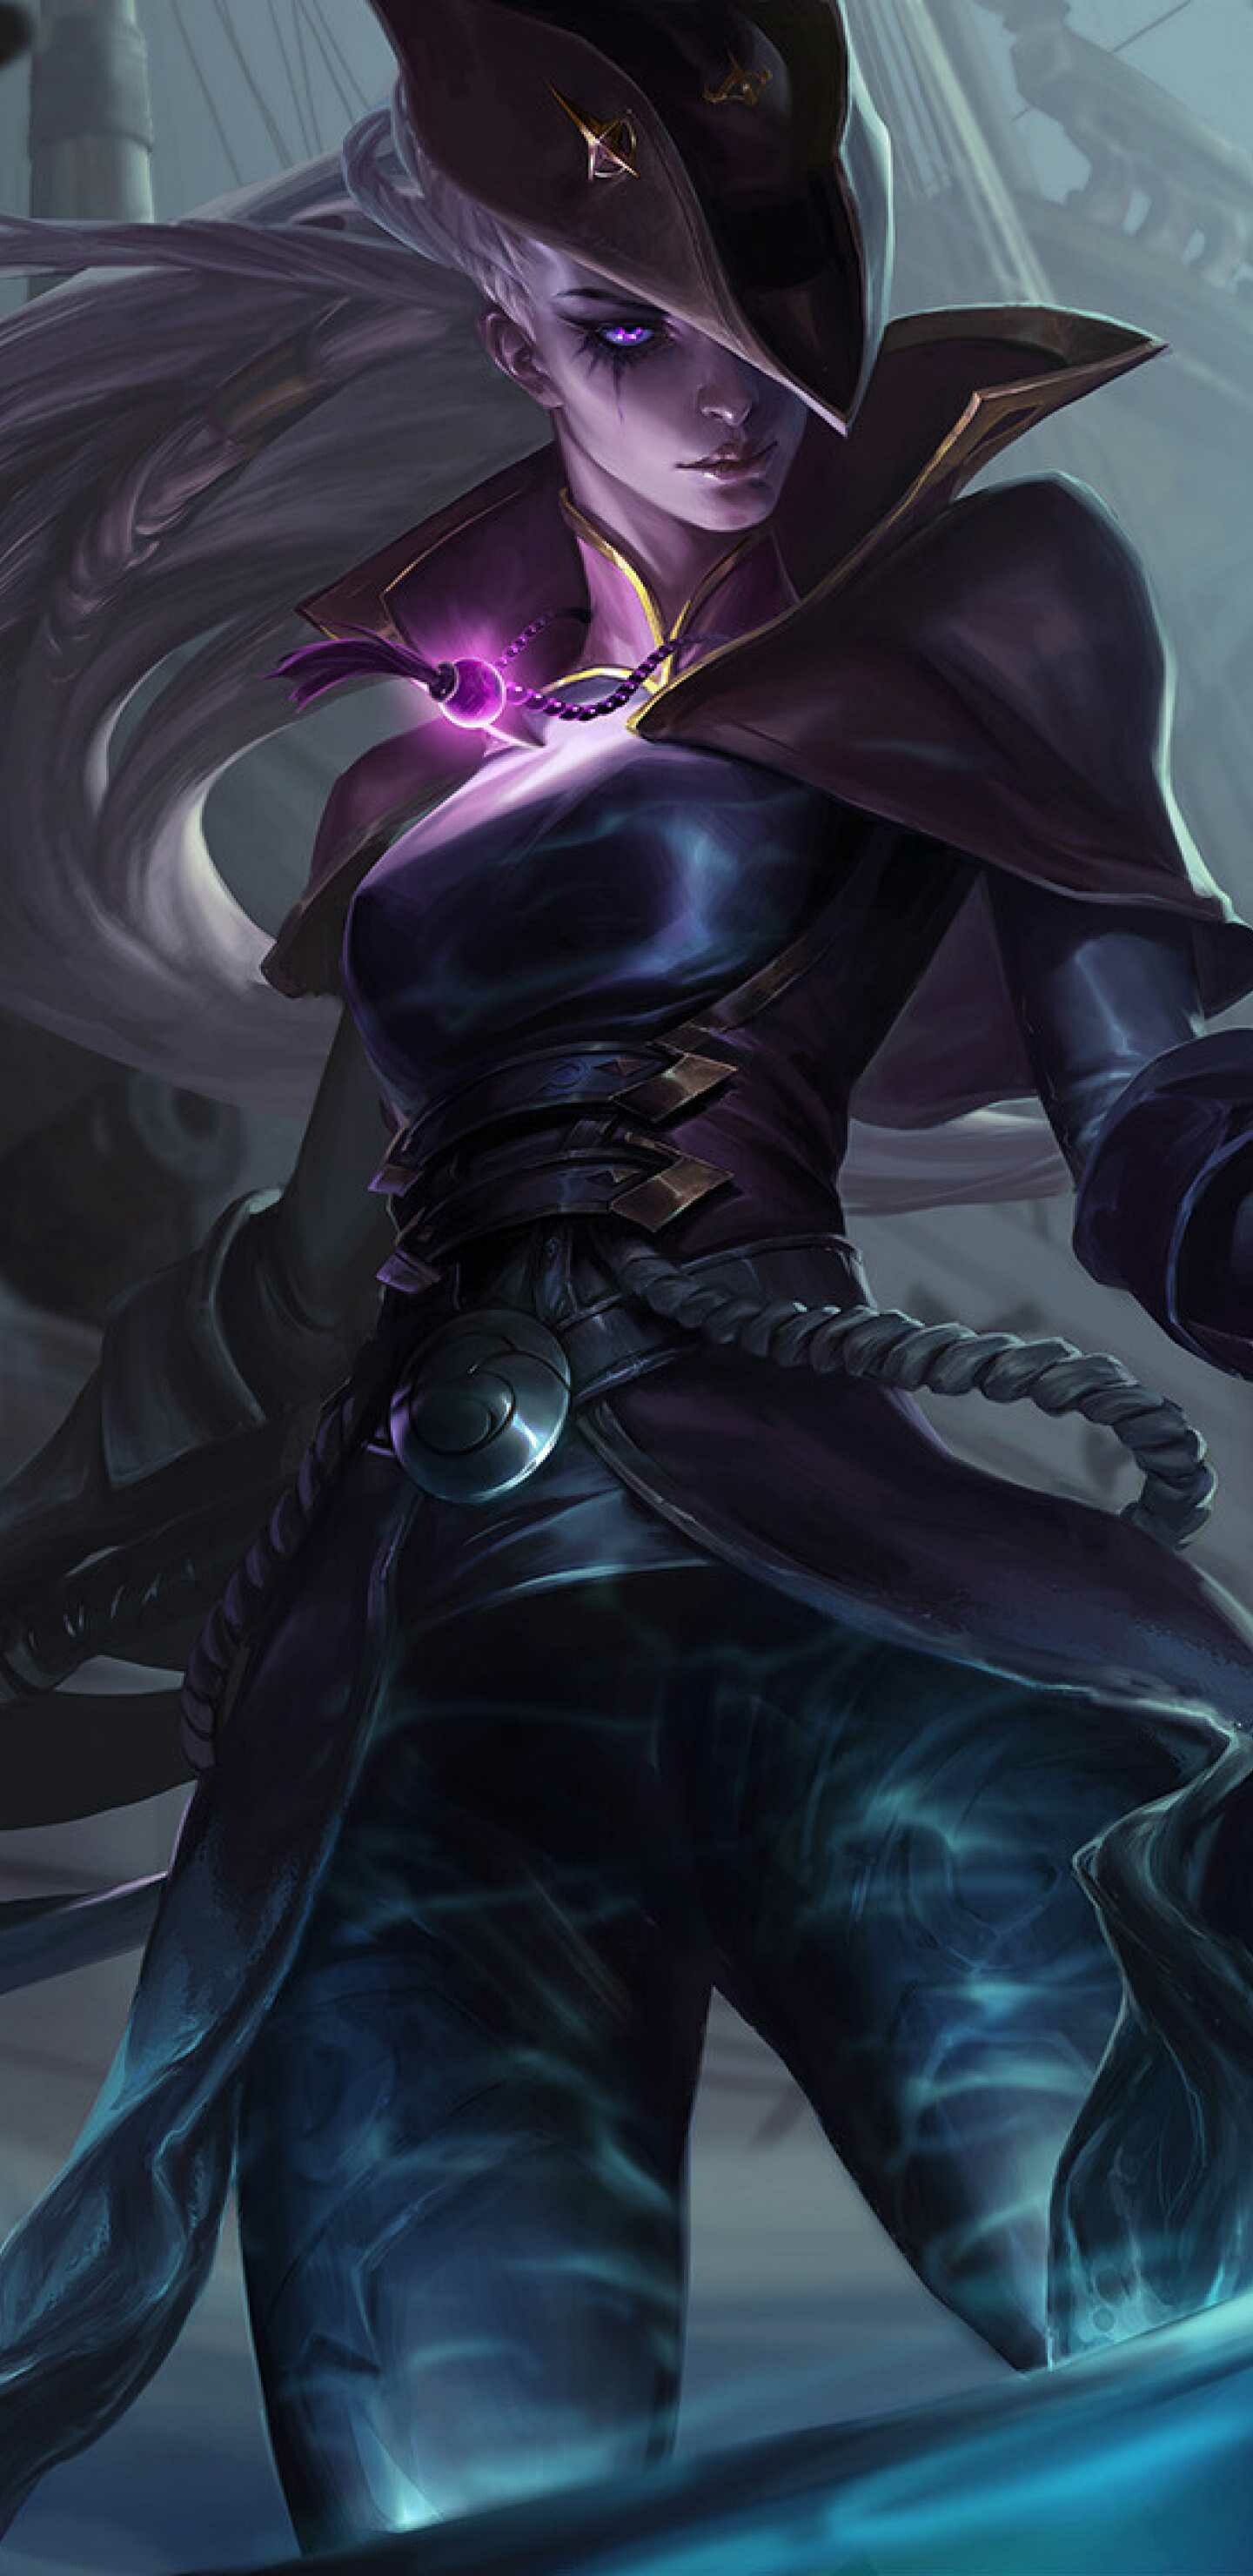 League of Legends: Diana, Scorn of the Moon, Assassin, Diver. 1440x2960 HD Background.